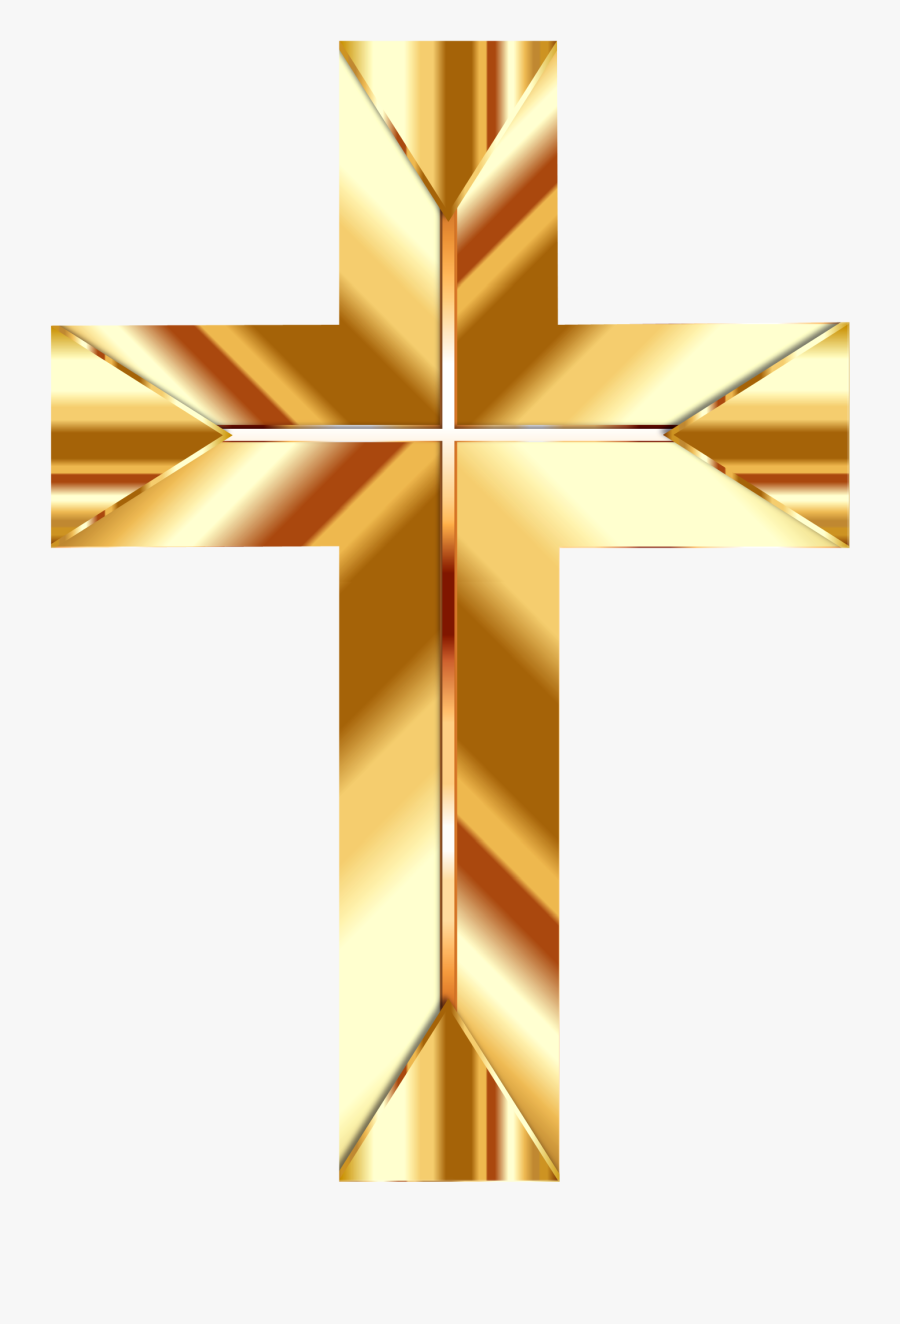 Christian Cross Png Images Free Download Clip Free - Golden Cross Png, Transparent Clipart